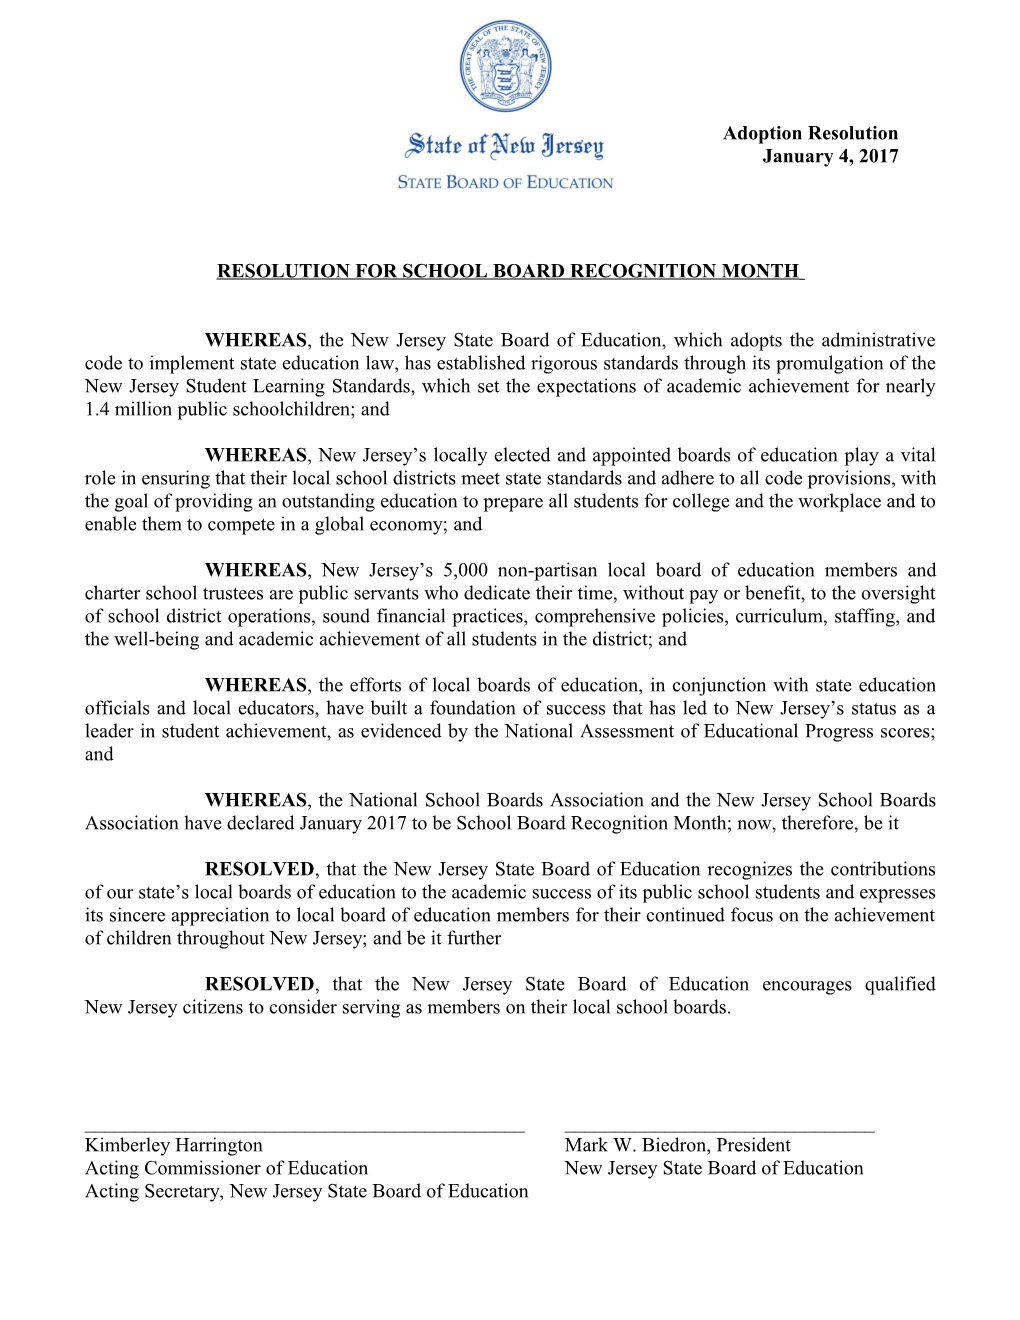 Resolution for School Board Recognition Month